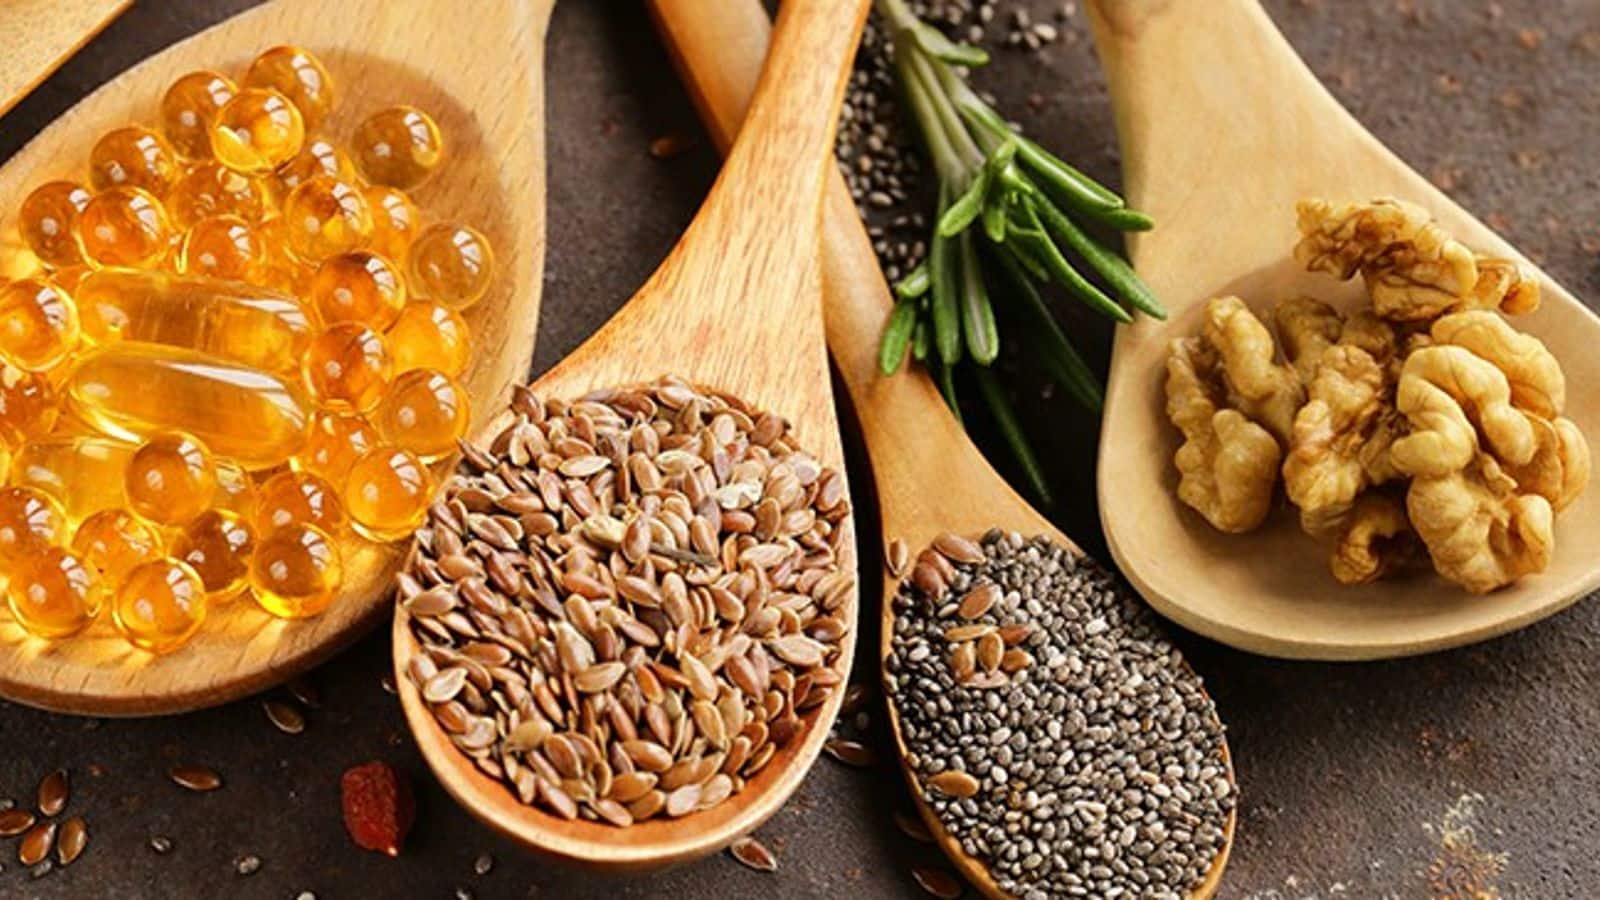 Boost your health with flaxseed vegan sauces